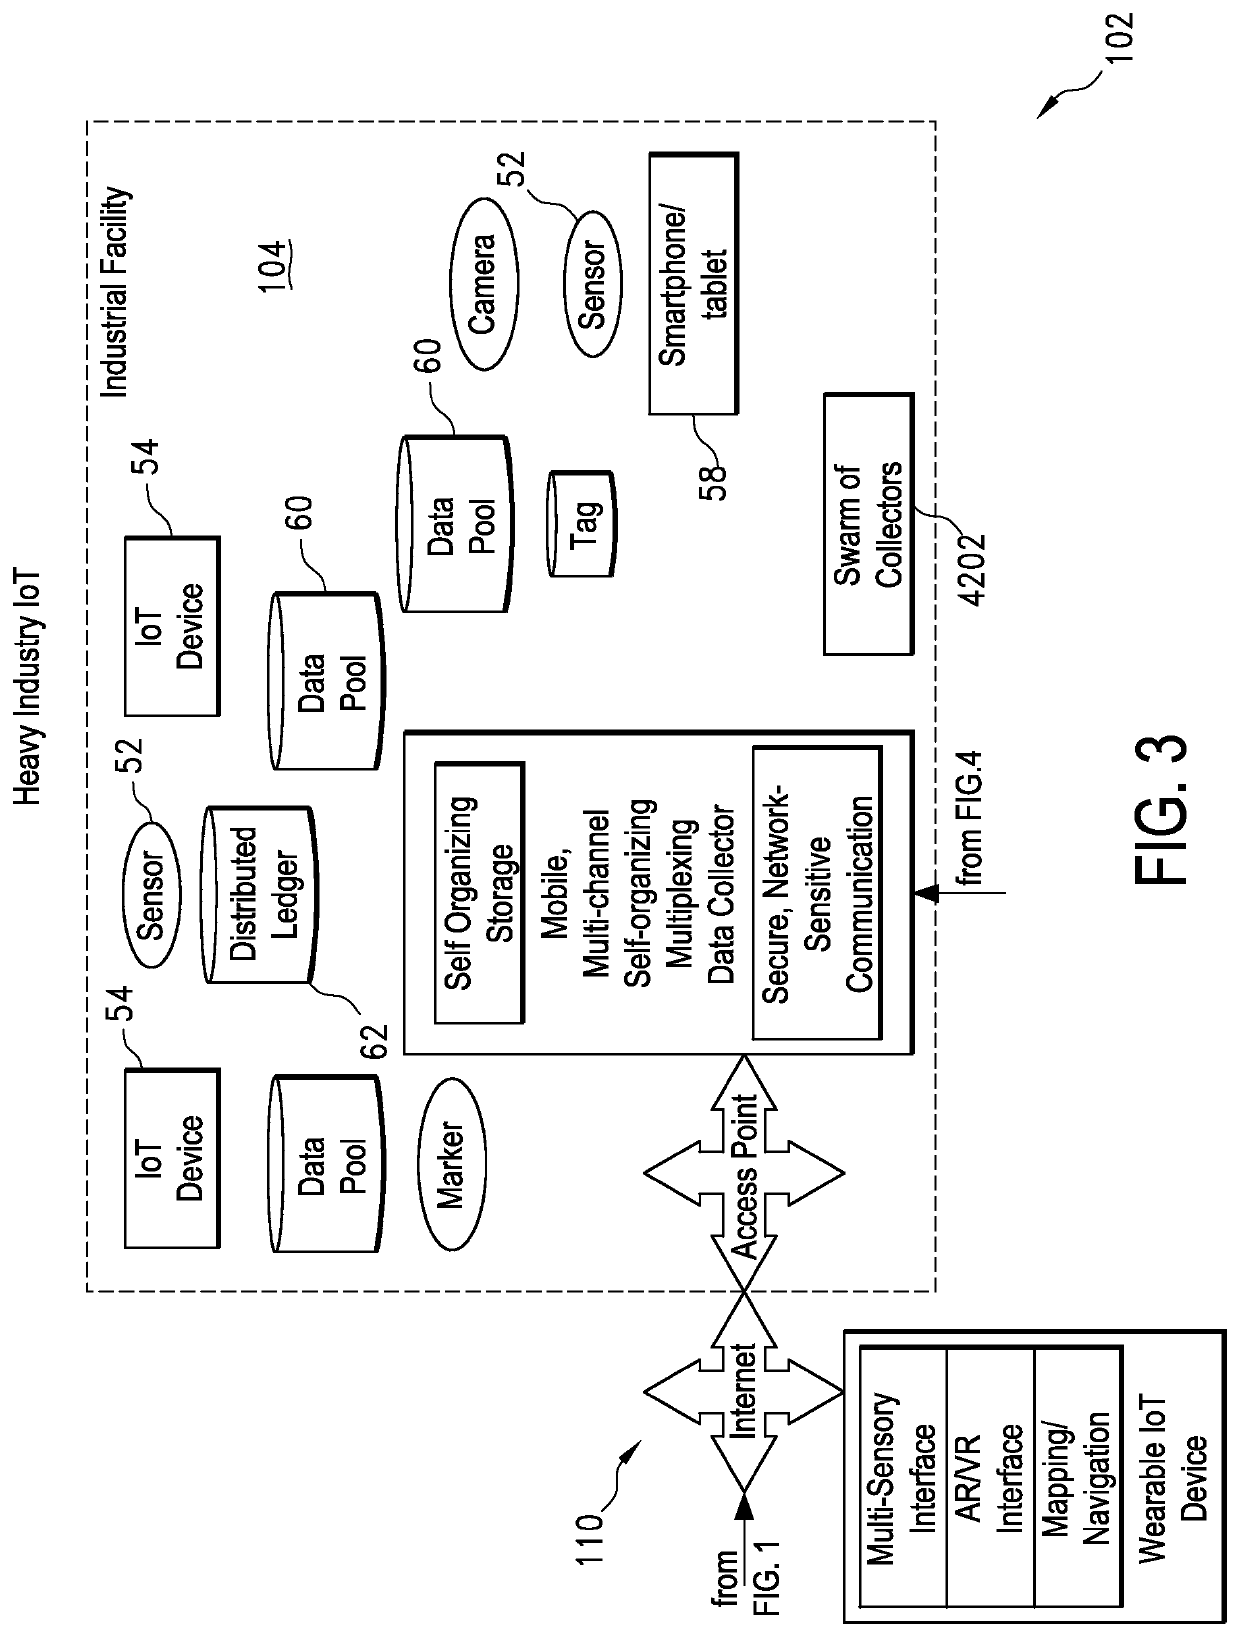 Method for data collection and frequency analysis with self-organization functionality